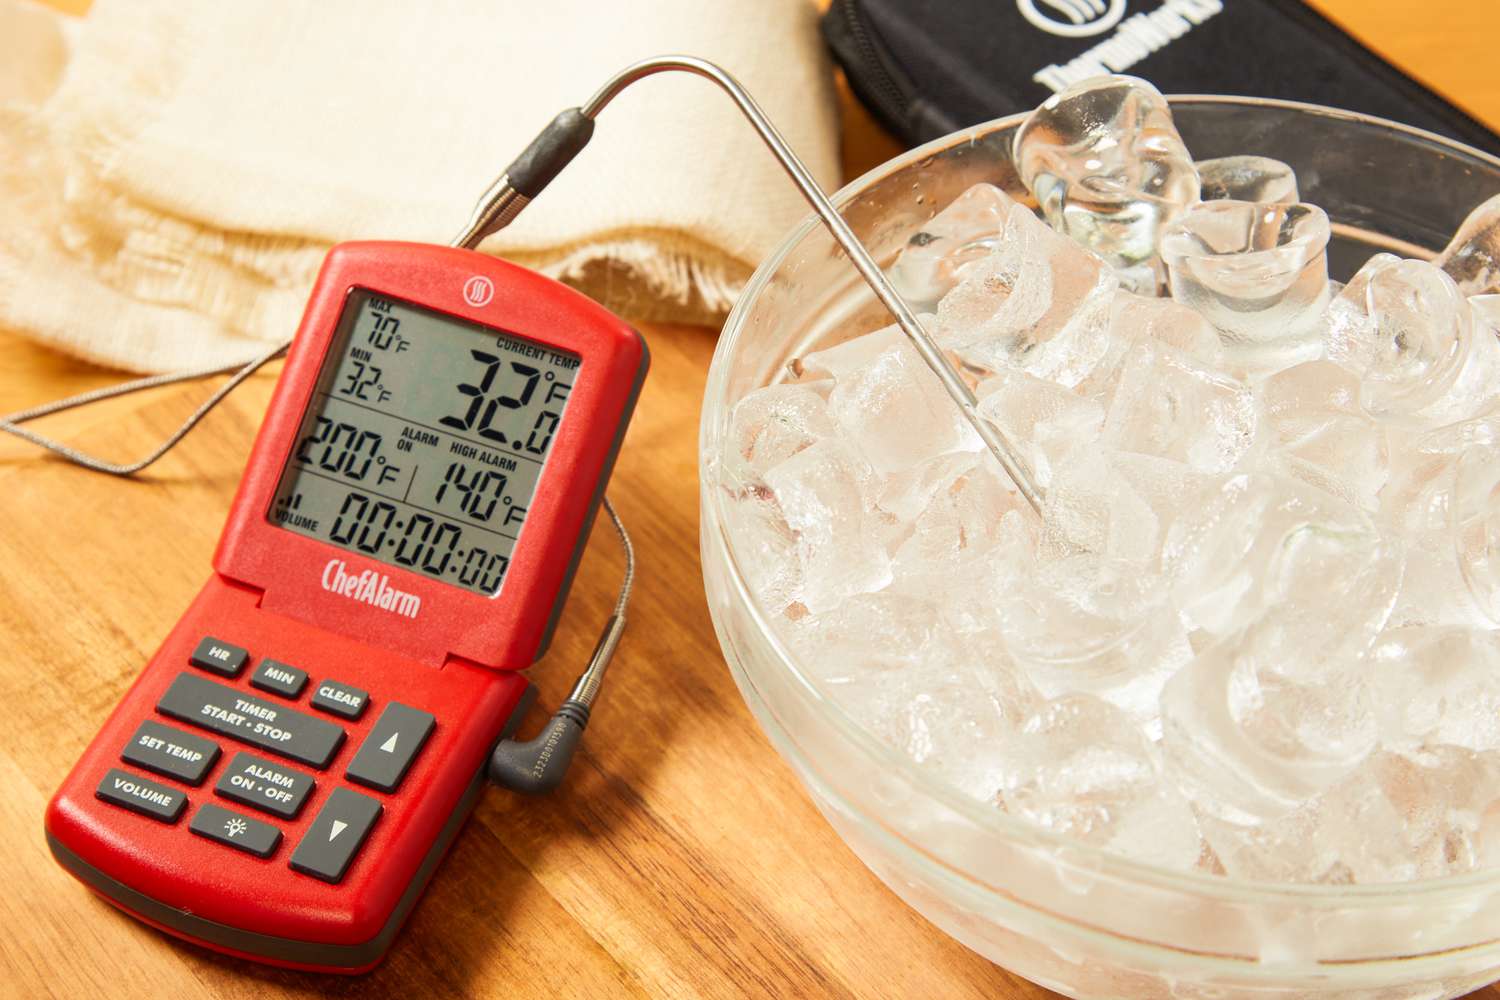 a probe thermometer being used to take the temperature of a bowl of ice